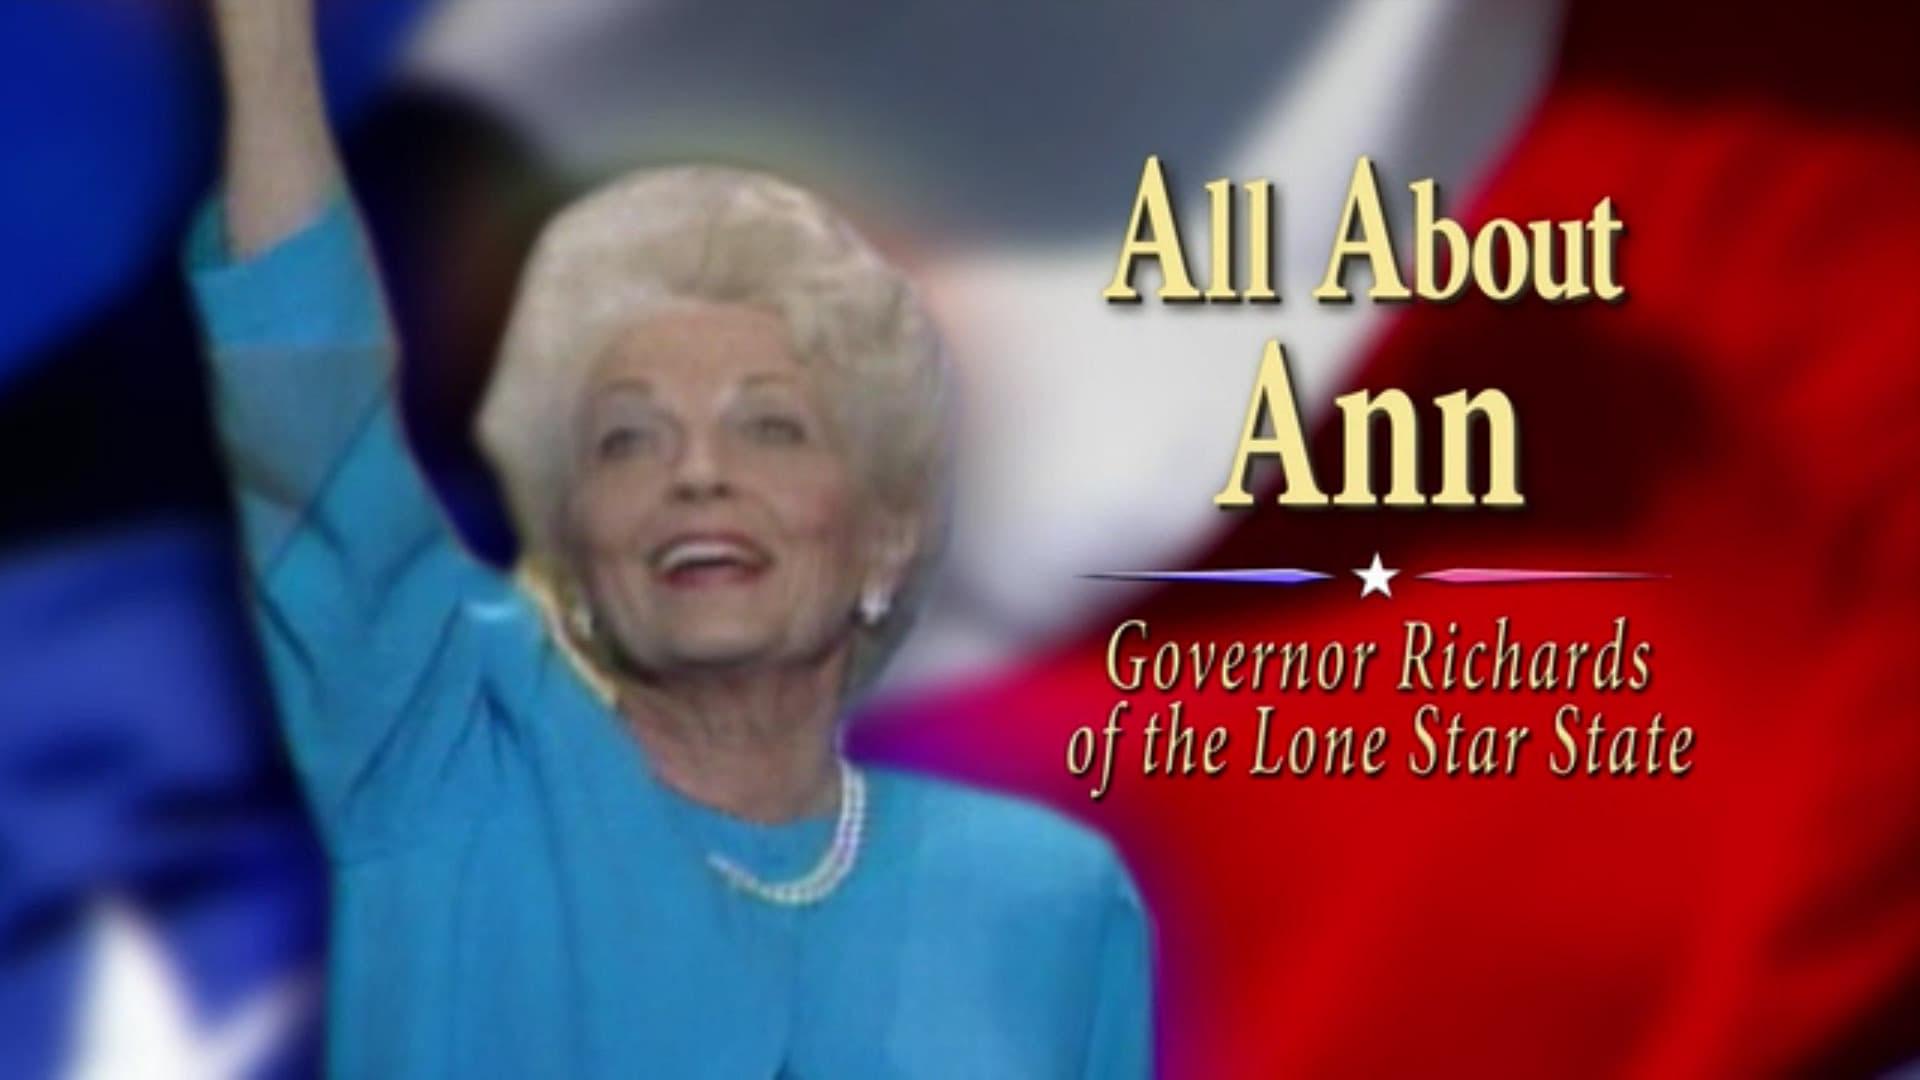 All About Ann: Governor Richards of the Lone Star State backdrop